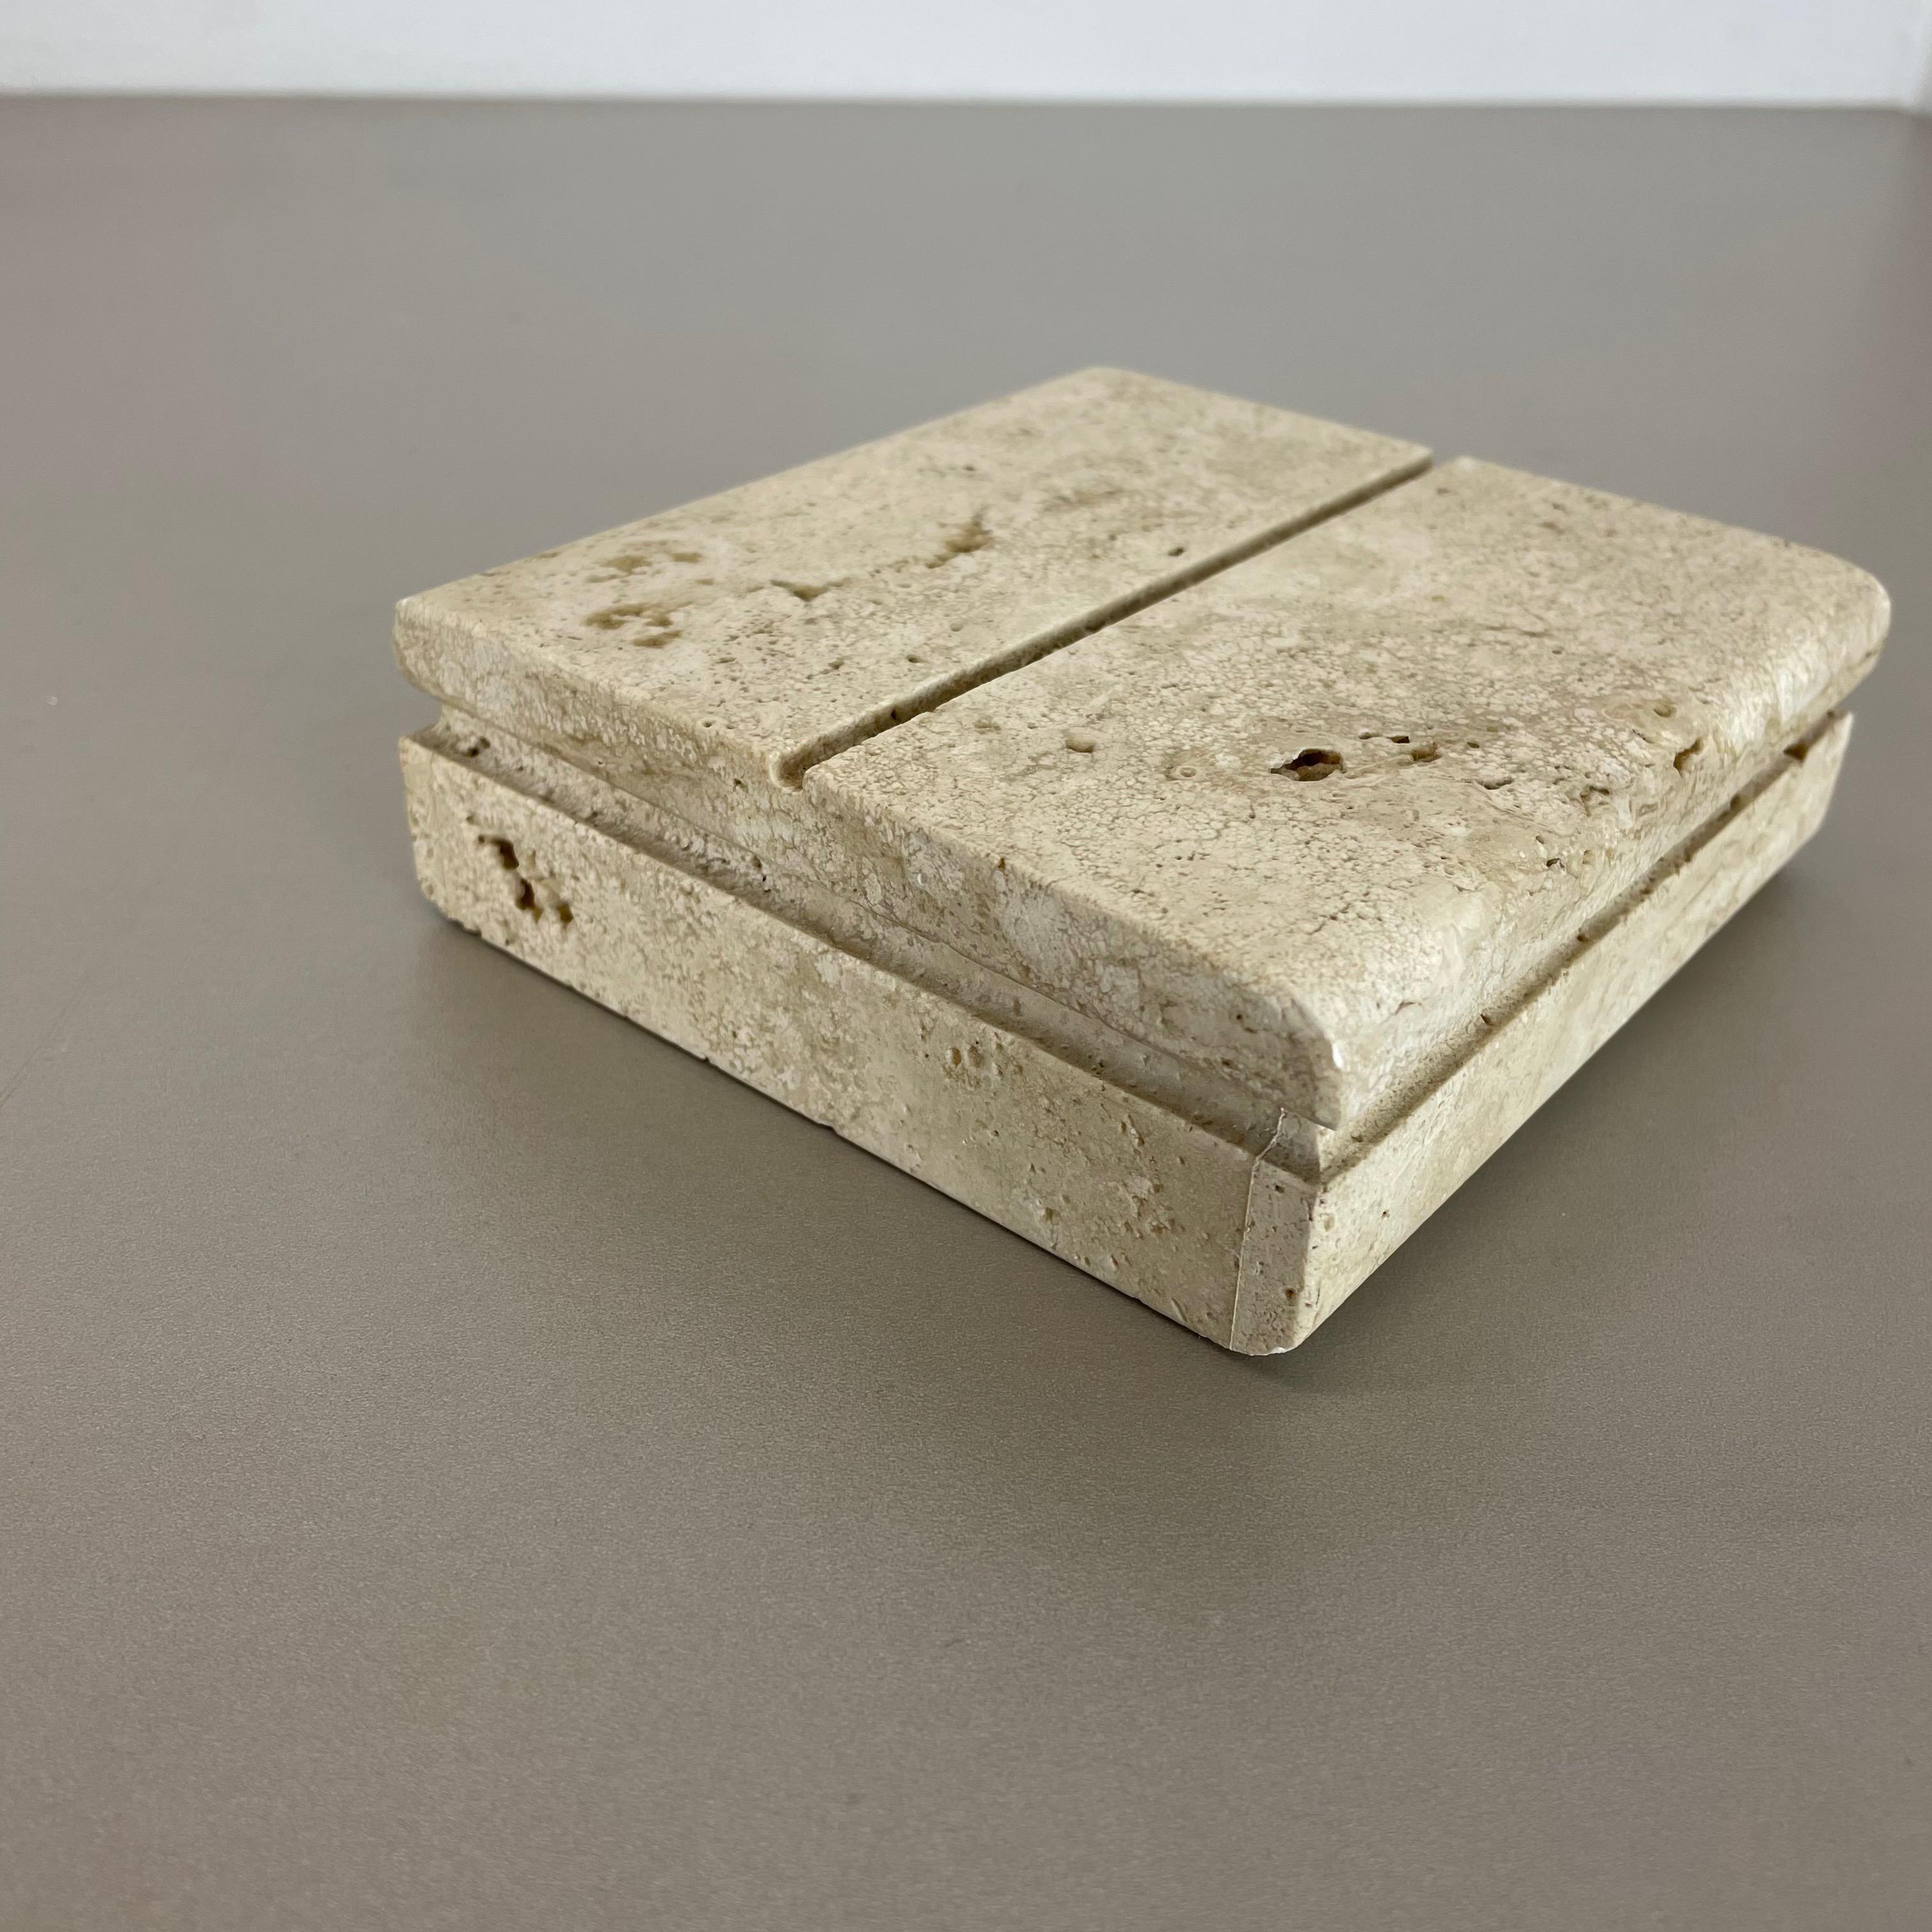 Modernist Travertine Marble Box Vide Poche by Fratelli Mannelli, Italy, 1970s For Sale 3